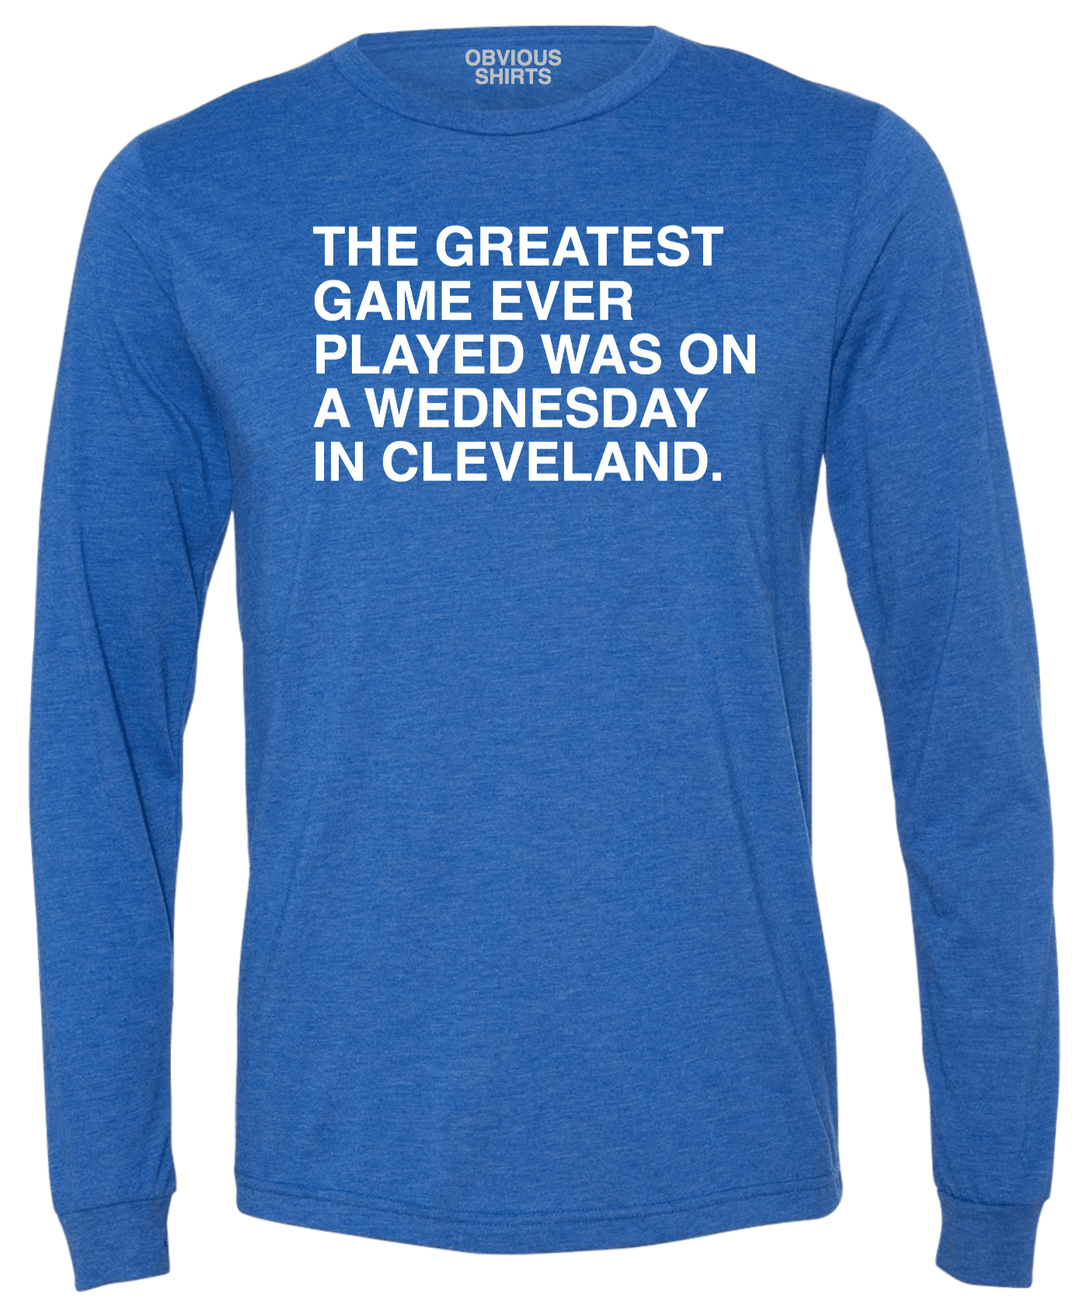 THE GREATEST GAME EVER PLAYED. (LONG SLEEVE) - OBVIOUS SHIRTS.